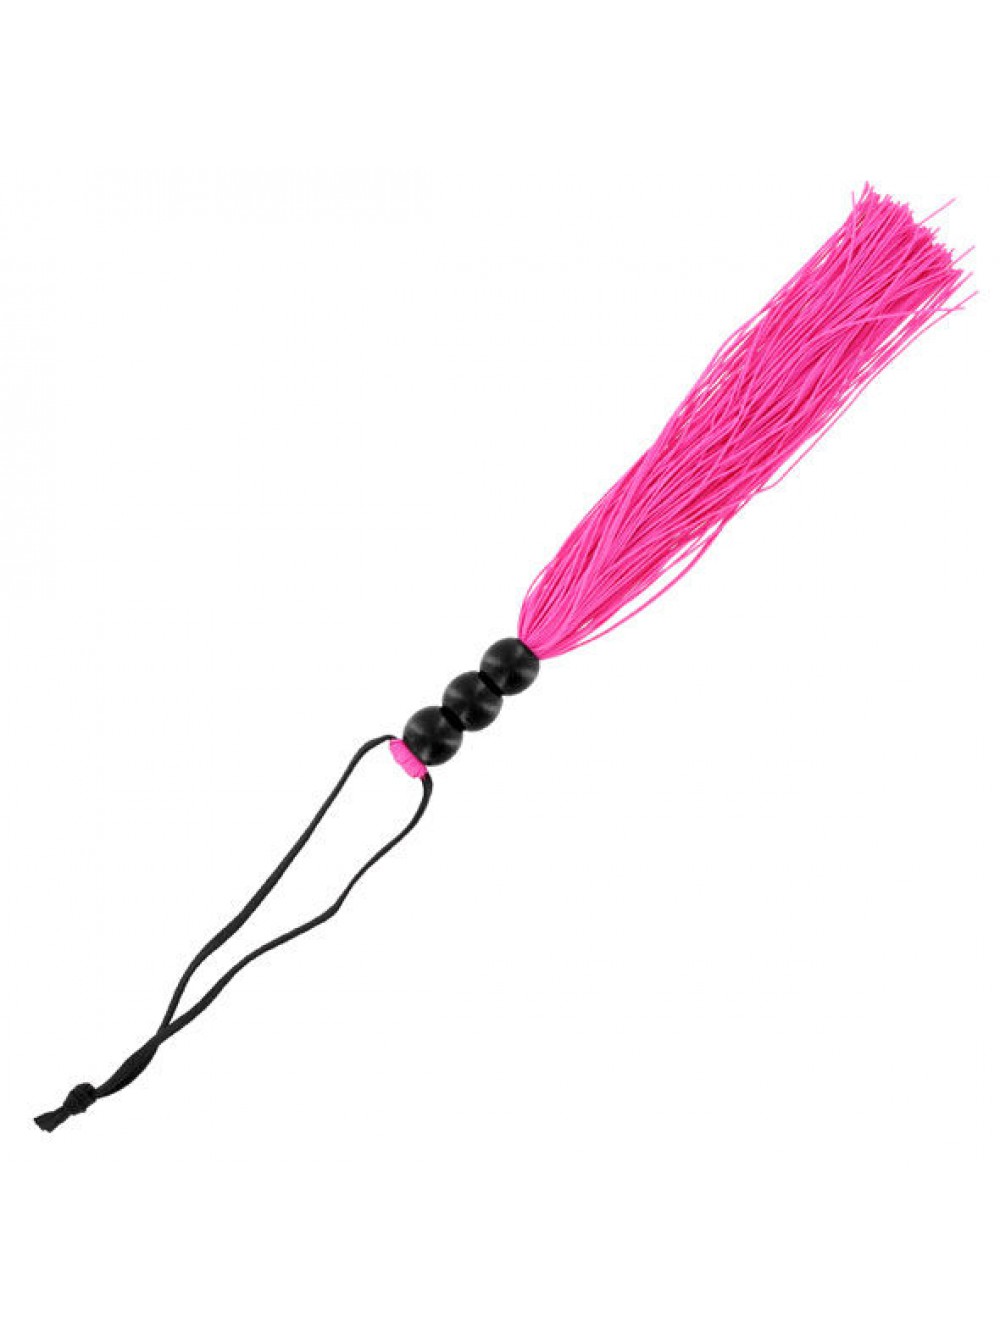 S&M MICHIEF WHIP SMALL PINK  25CM